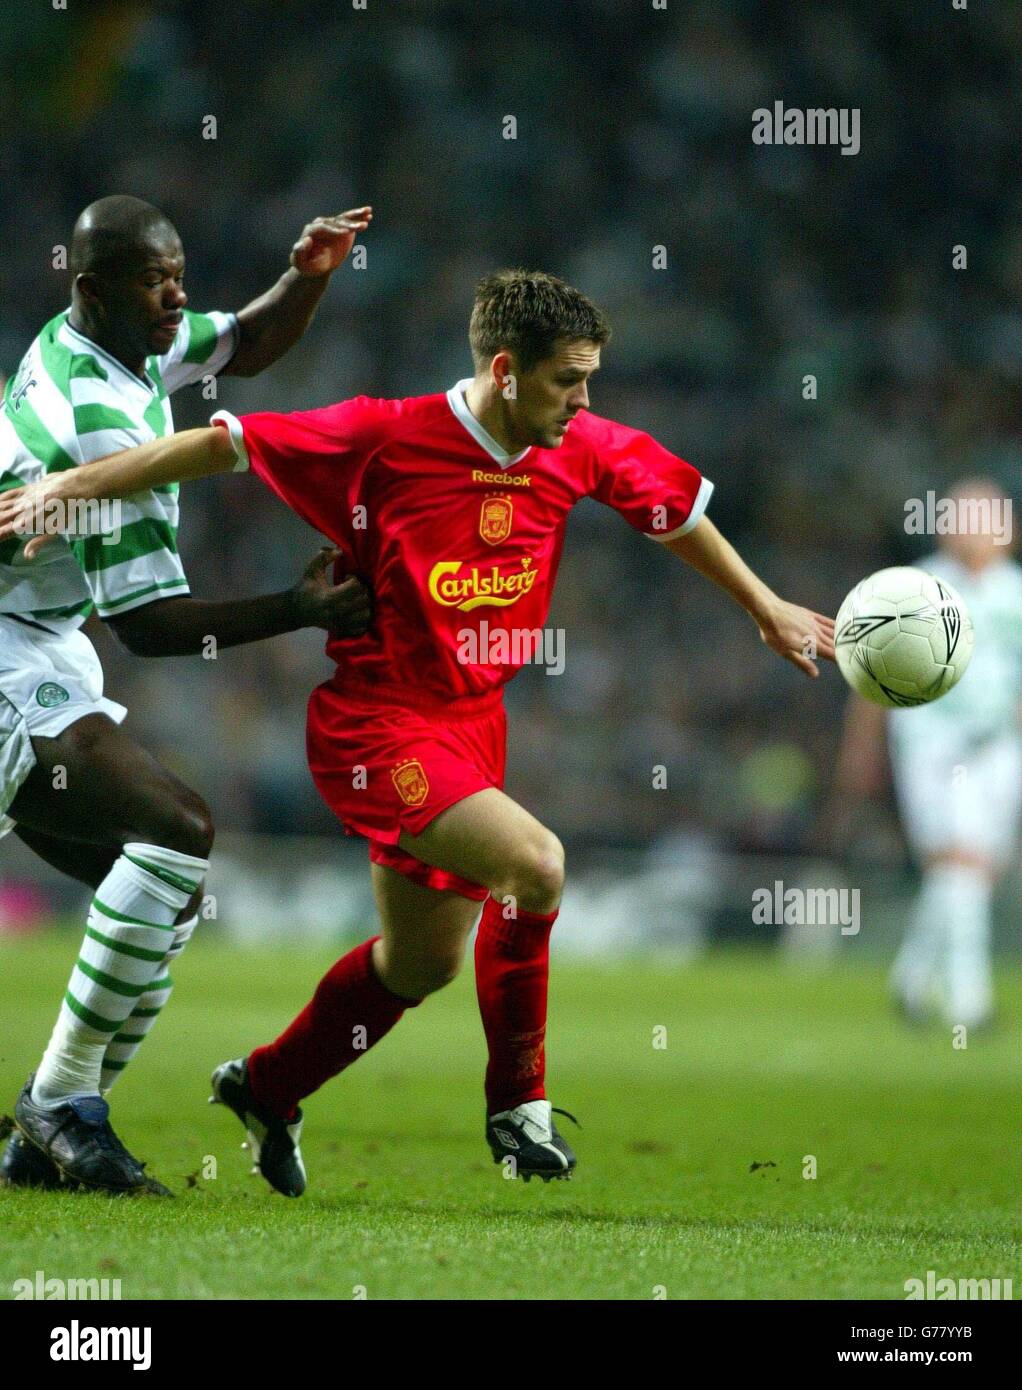 Celtic's Bobo Baldie takes on Michael Owen, during their UEFA Cup quarter-final 1st leg match at Celtic Park, Glasgow. Stock Photo